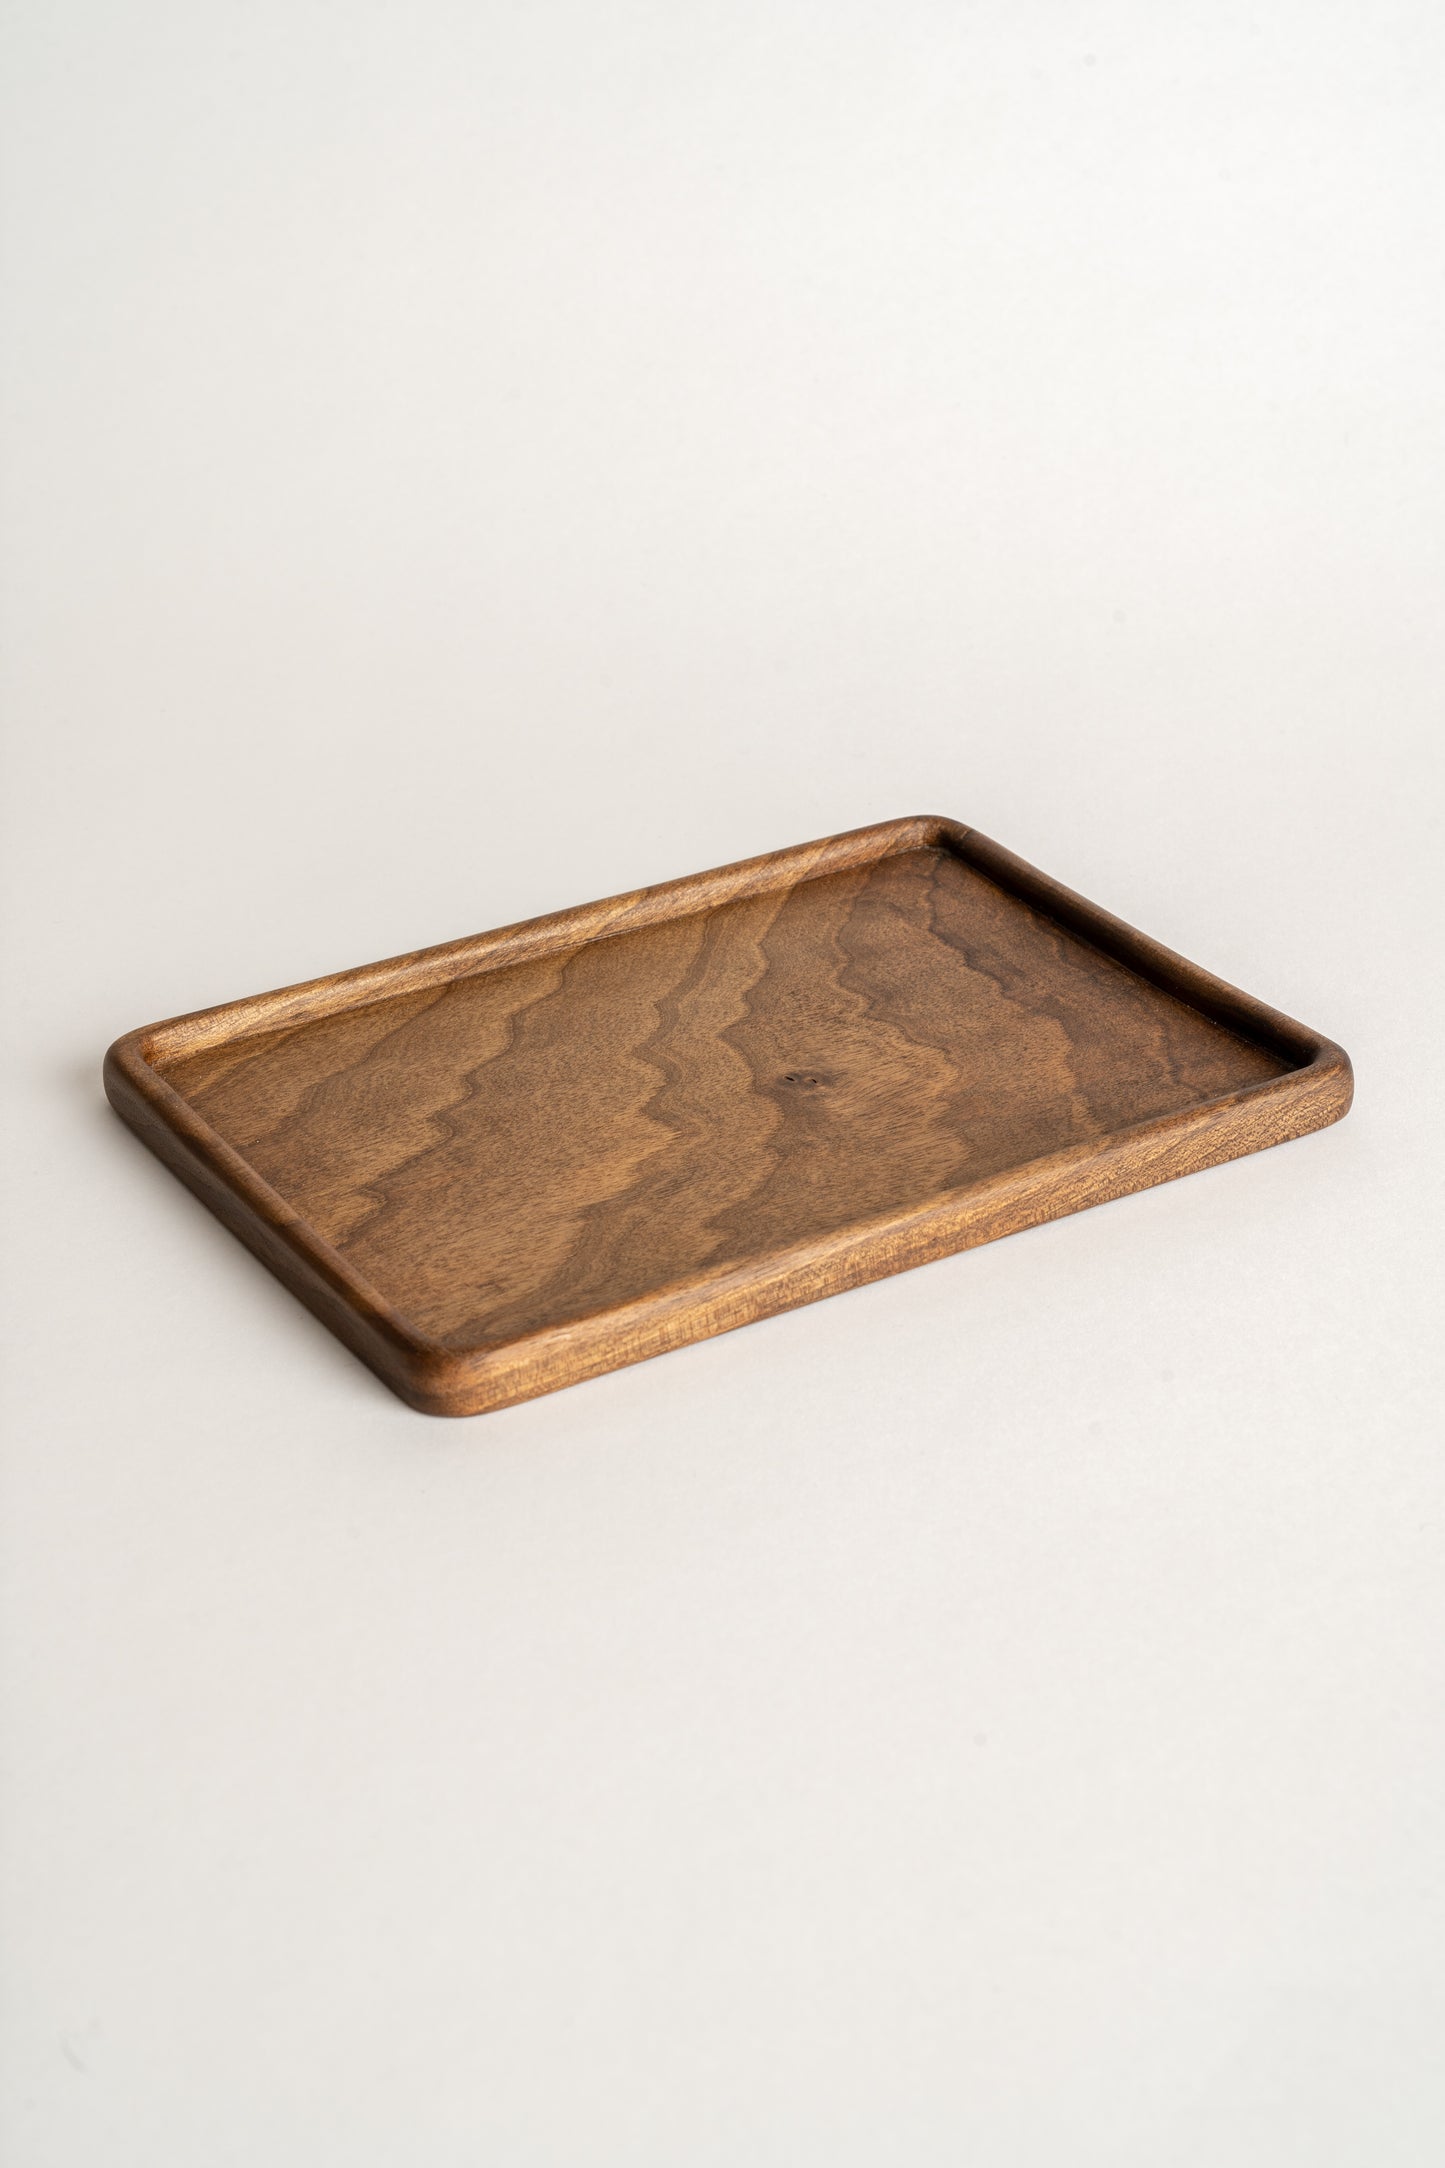 Yrhes Hand Carved Walnut Wood Serving Plate Small